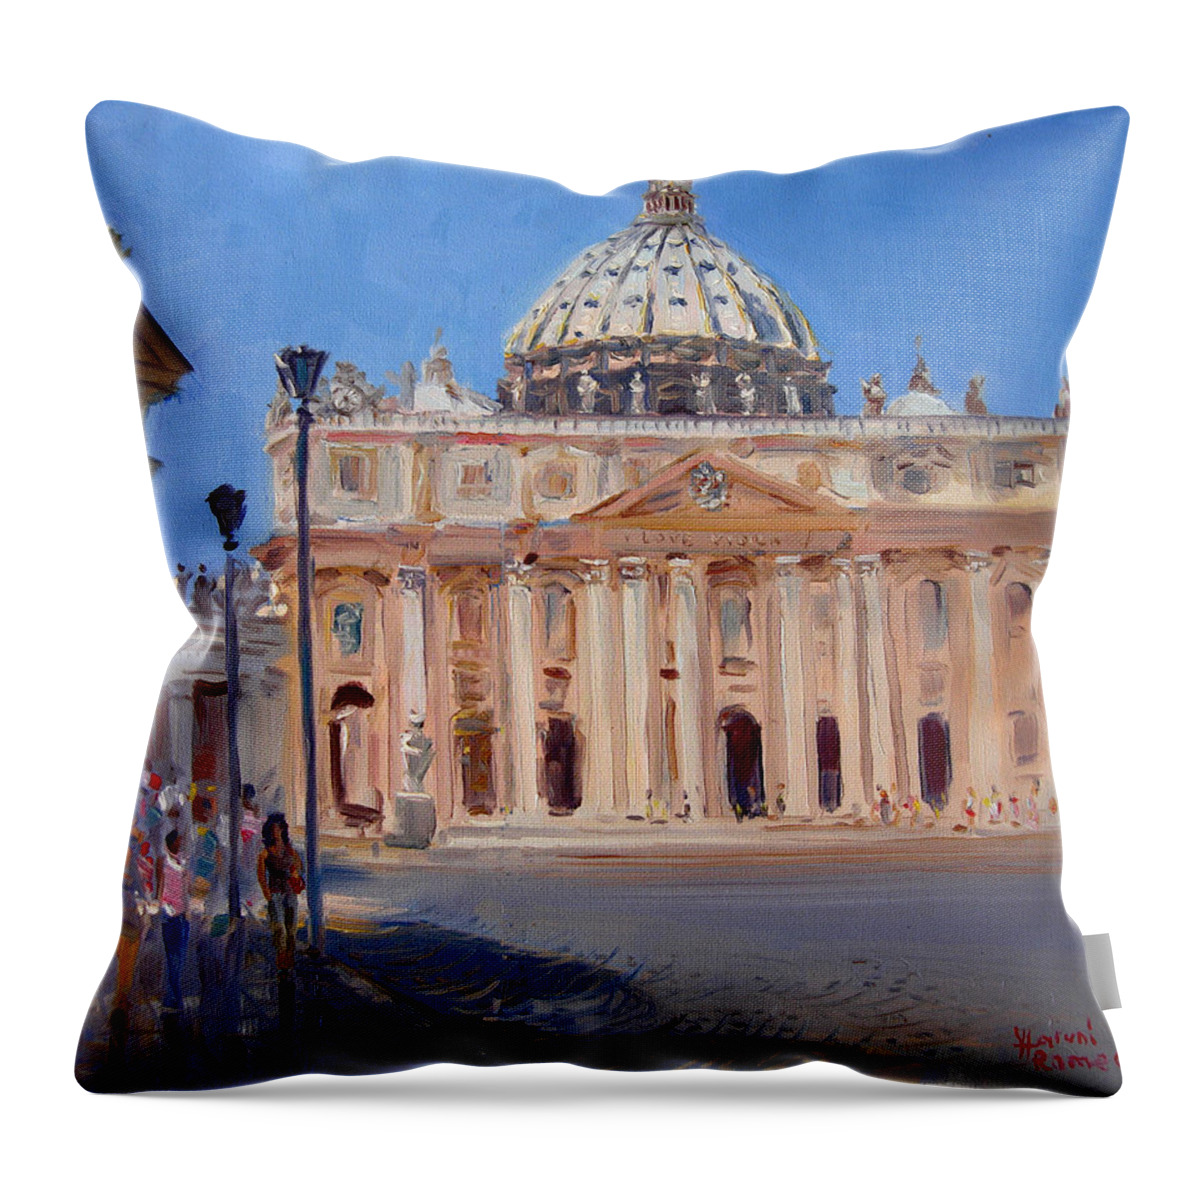 Rome Throw Pillow featuring the painting Rome Piazza San Pietro by Ylli Haruni